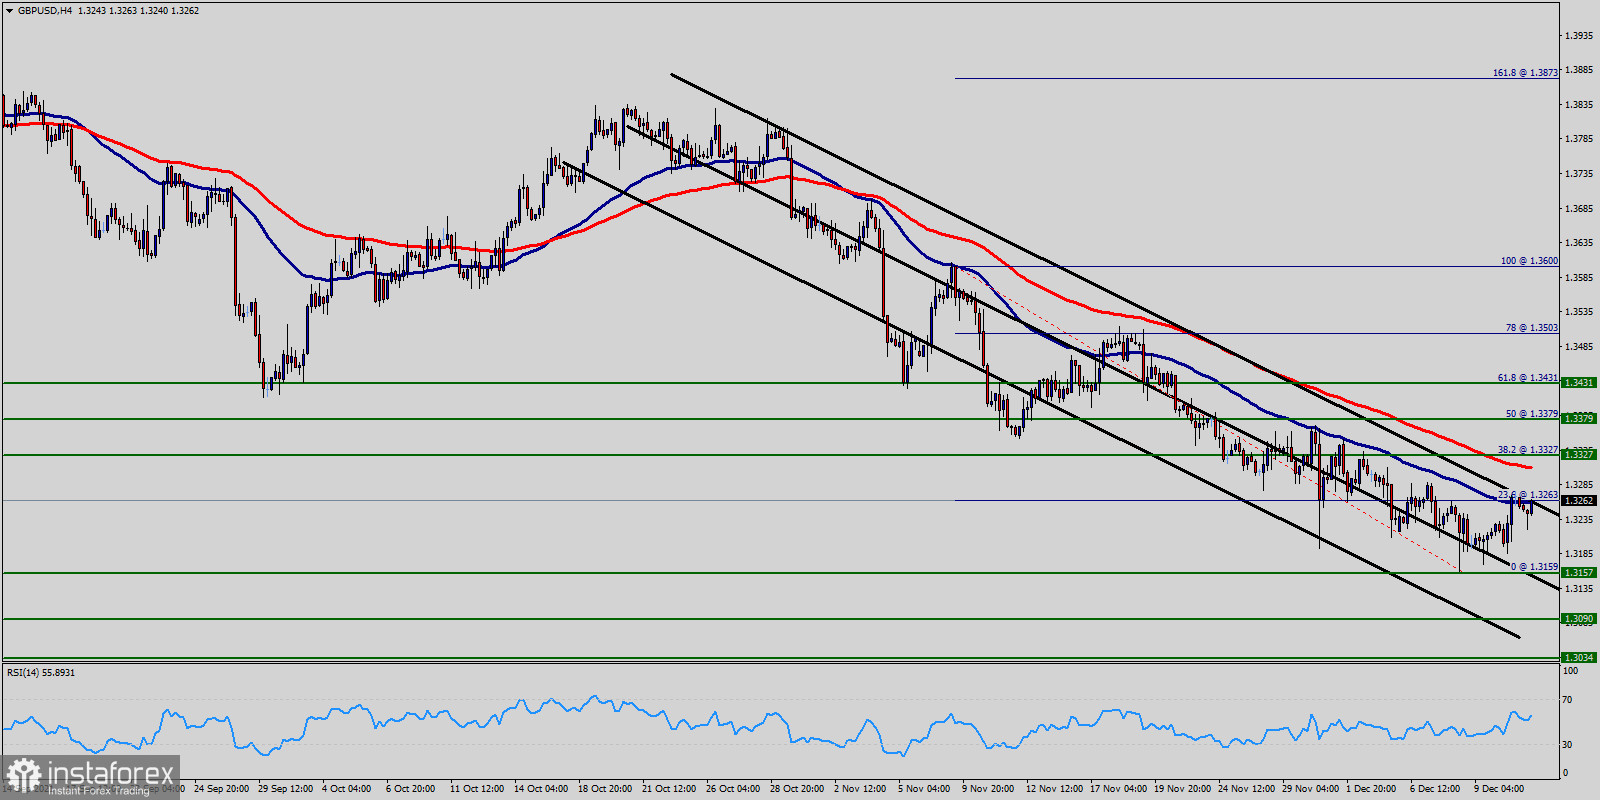 Technical Analysis of GBP/USD for December 13, 2021